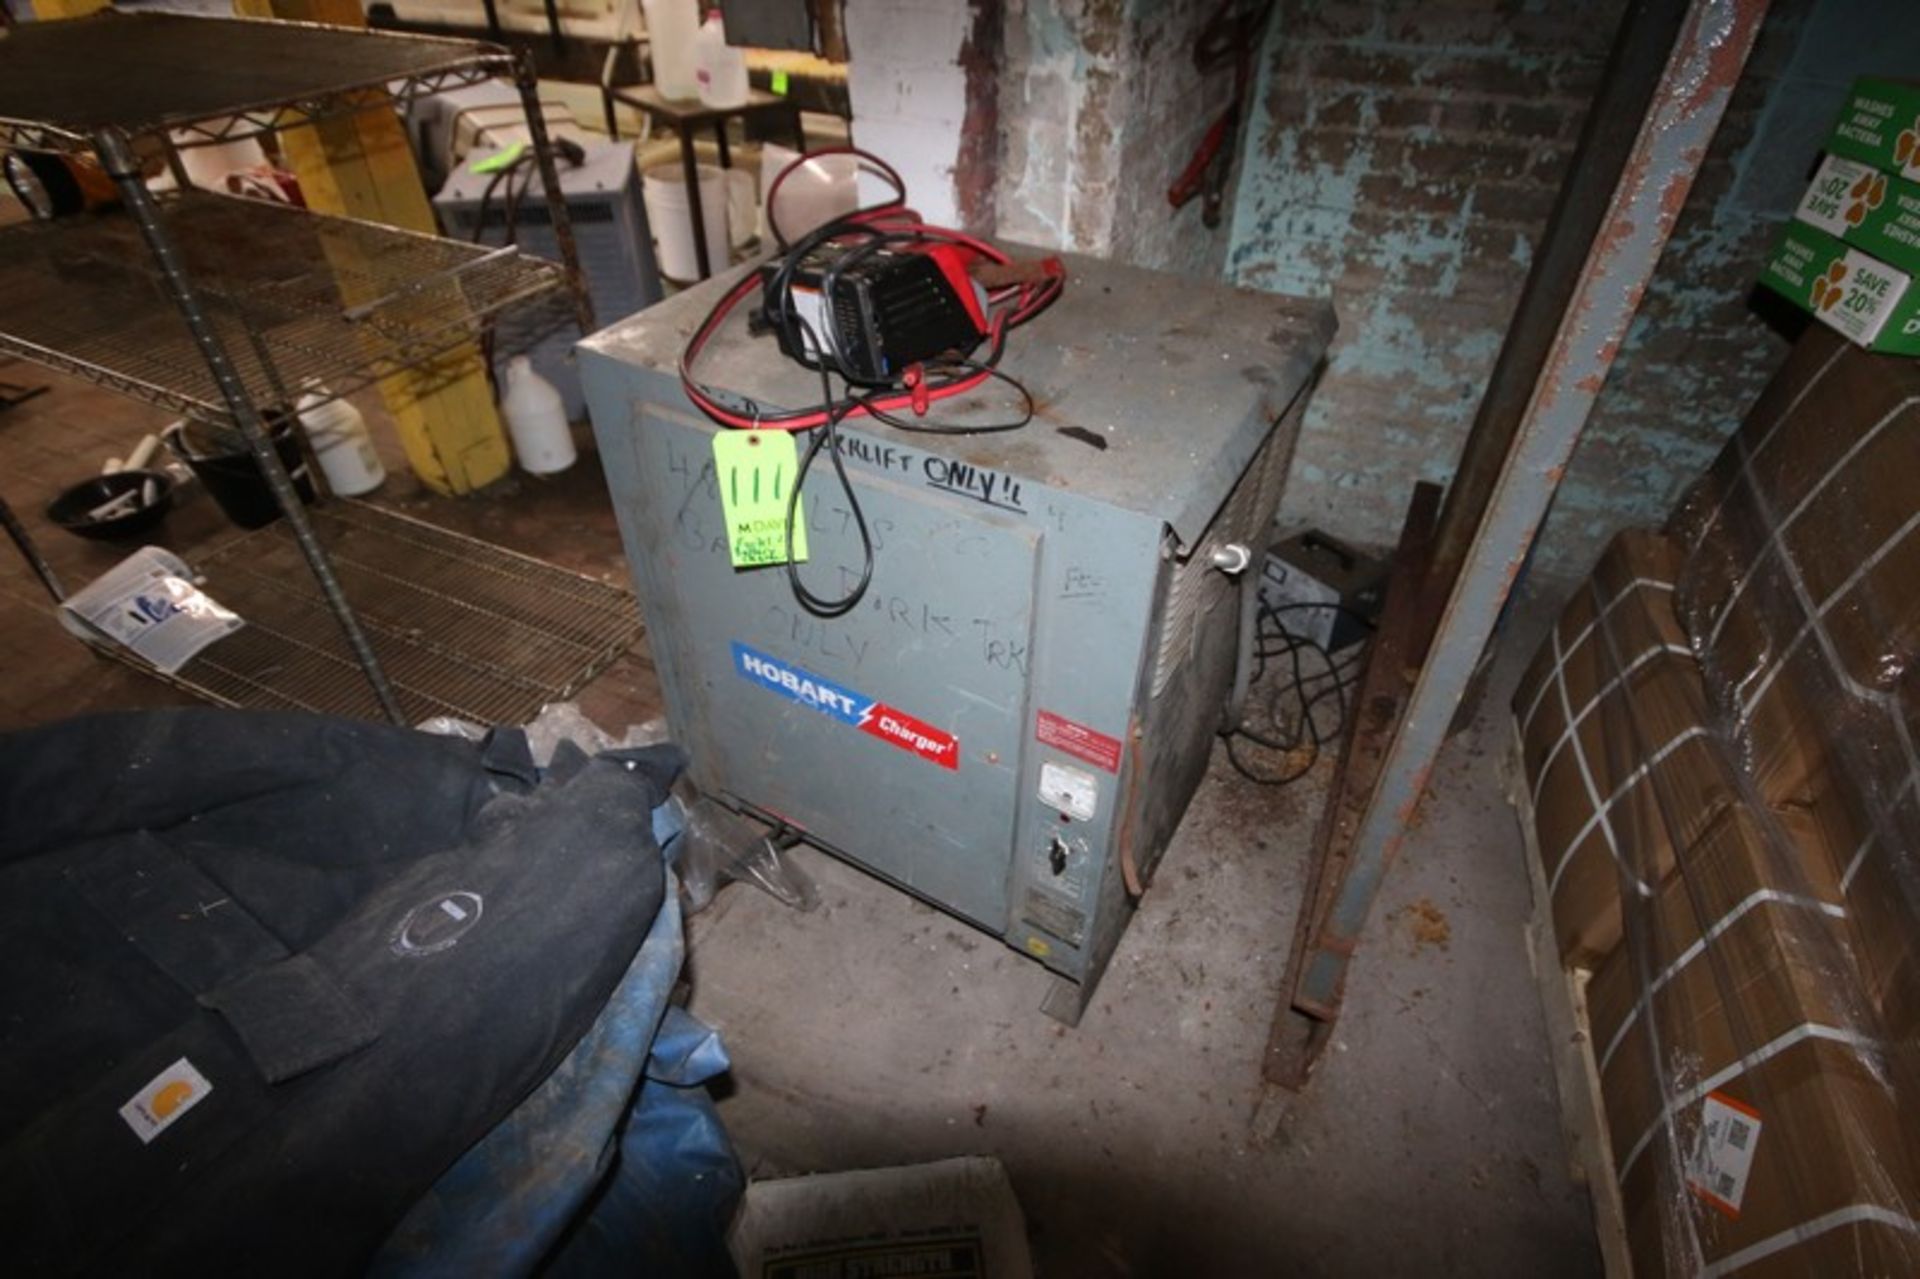 Hobart Forklift Battery Charger, M/N 3R24-550, S/N 79CS22874, 208-240/480 Volts, 3 Phase (LOCATED IN